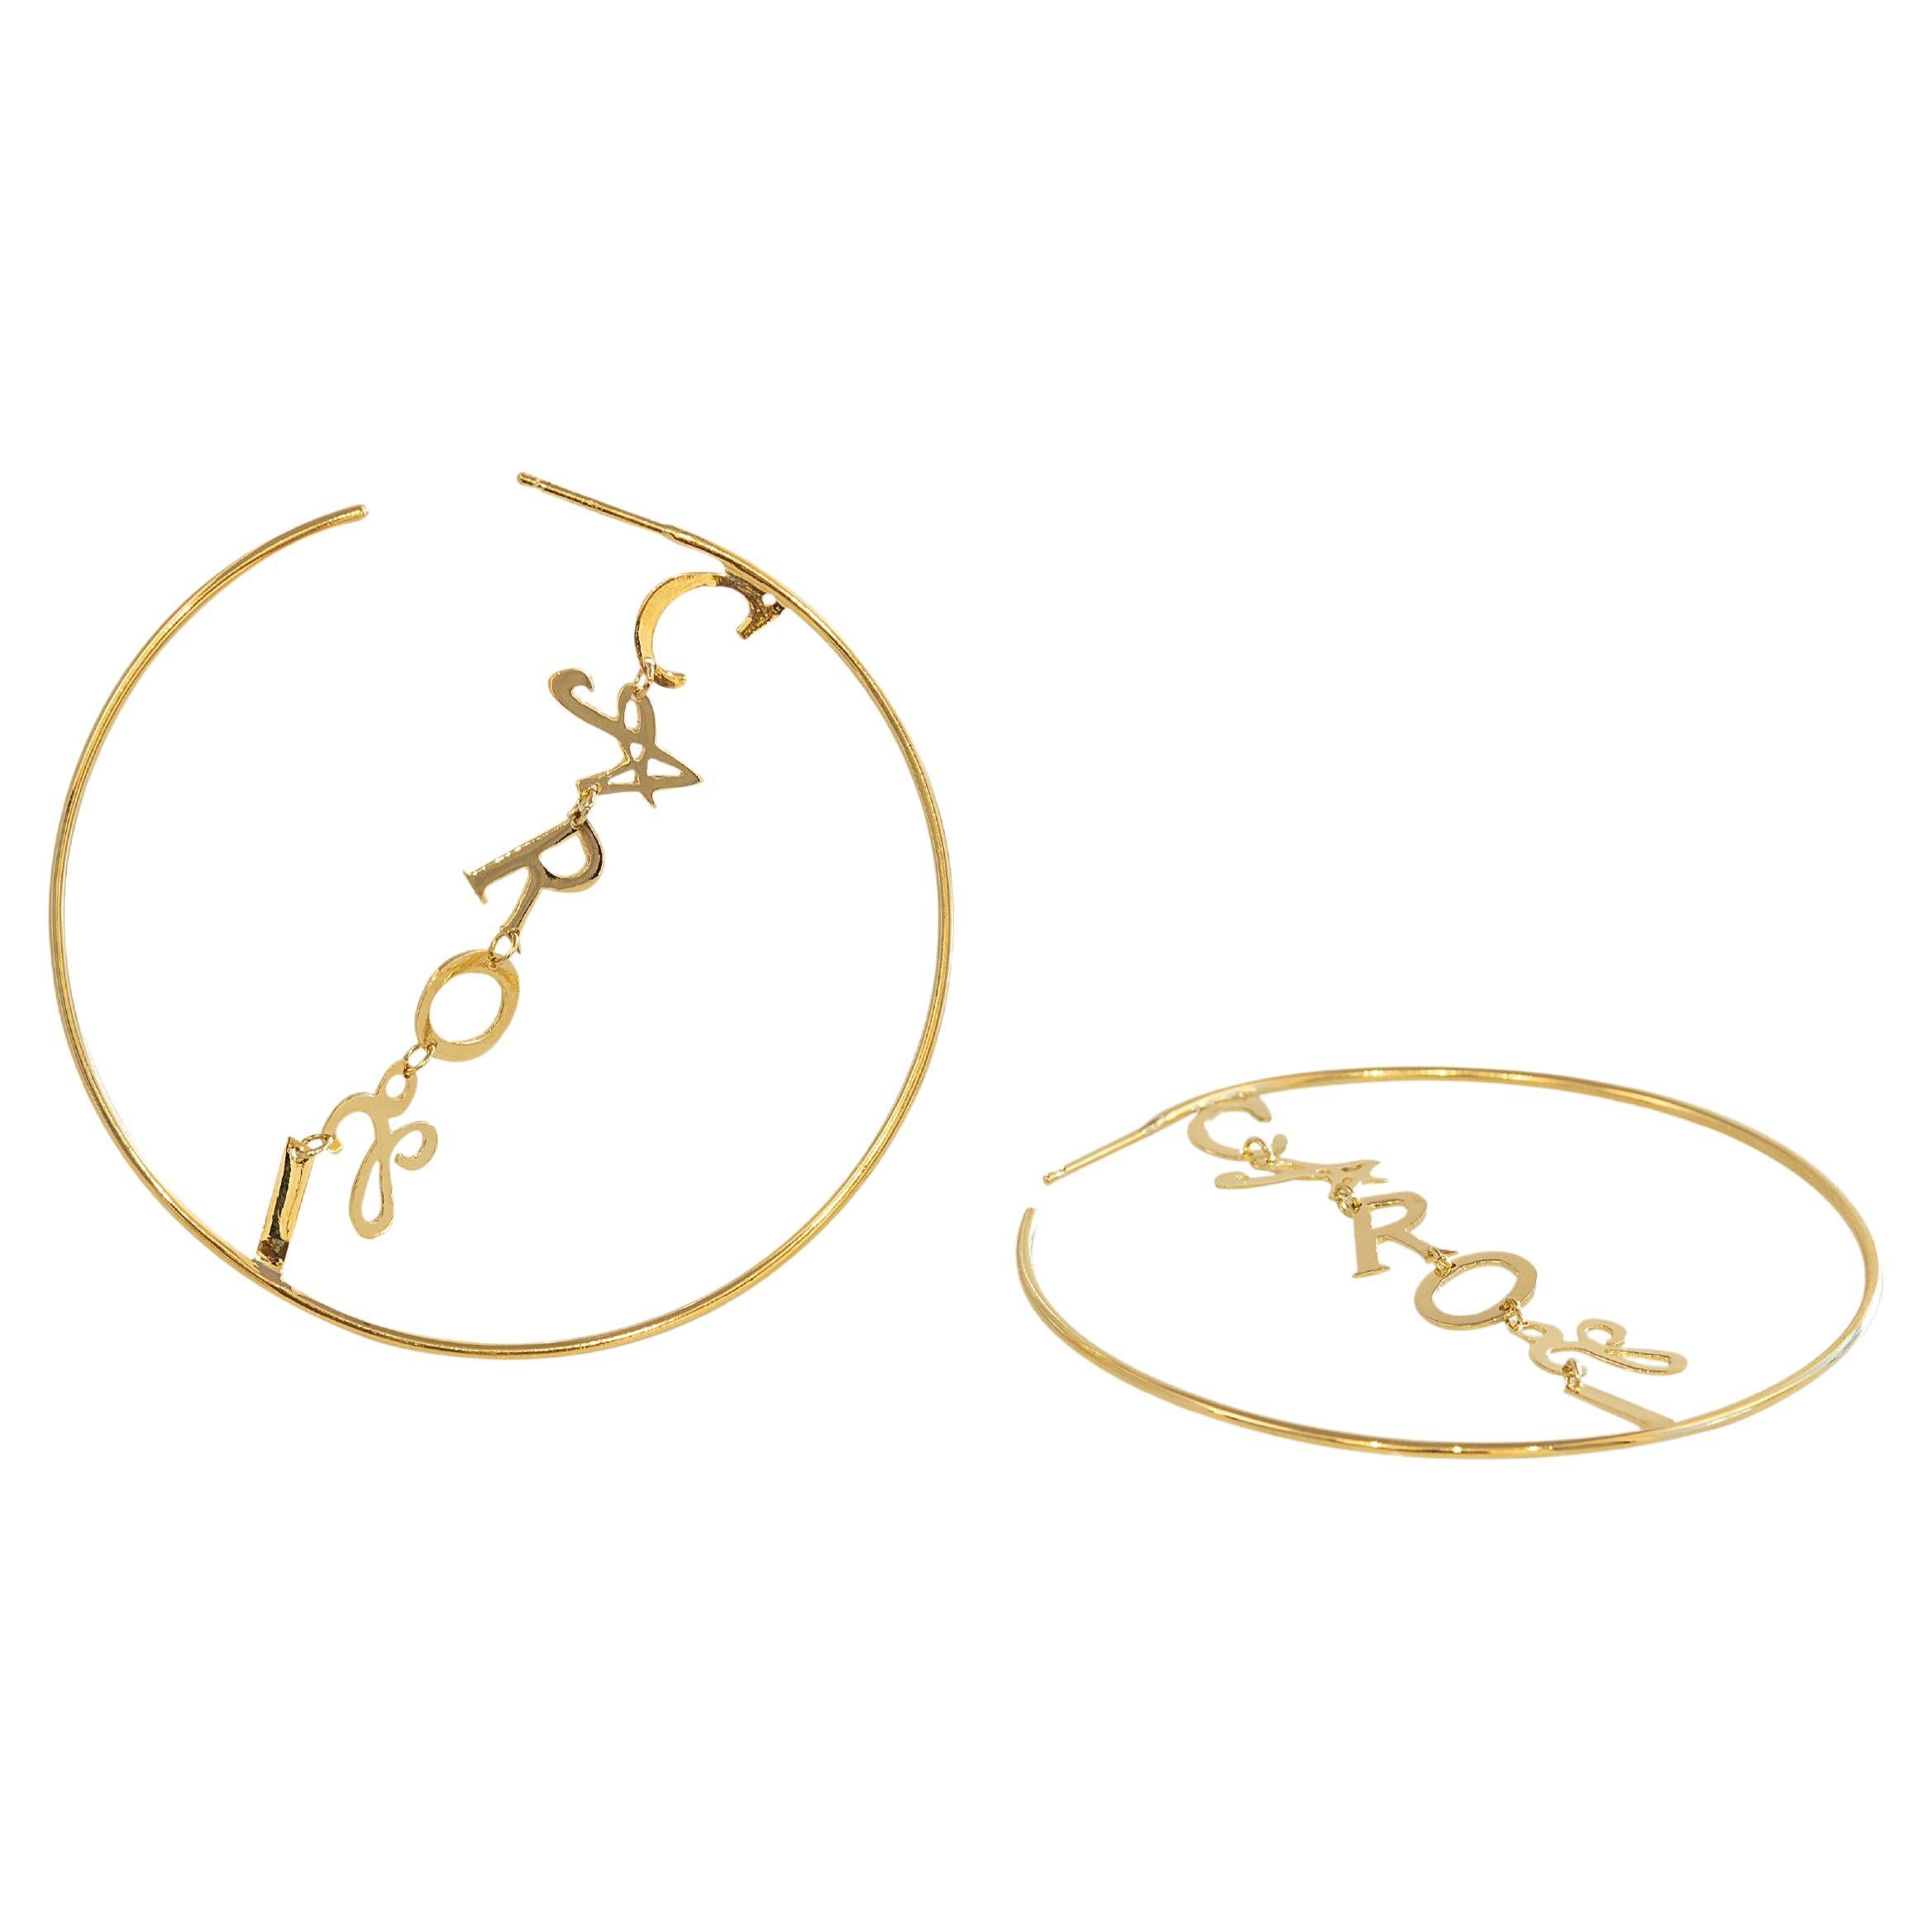 Personalize 18K Yellow Gold Bespoke Hoops Contemporary Letter Design Earrings